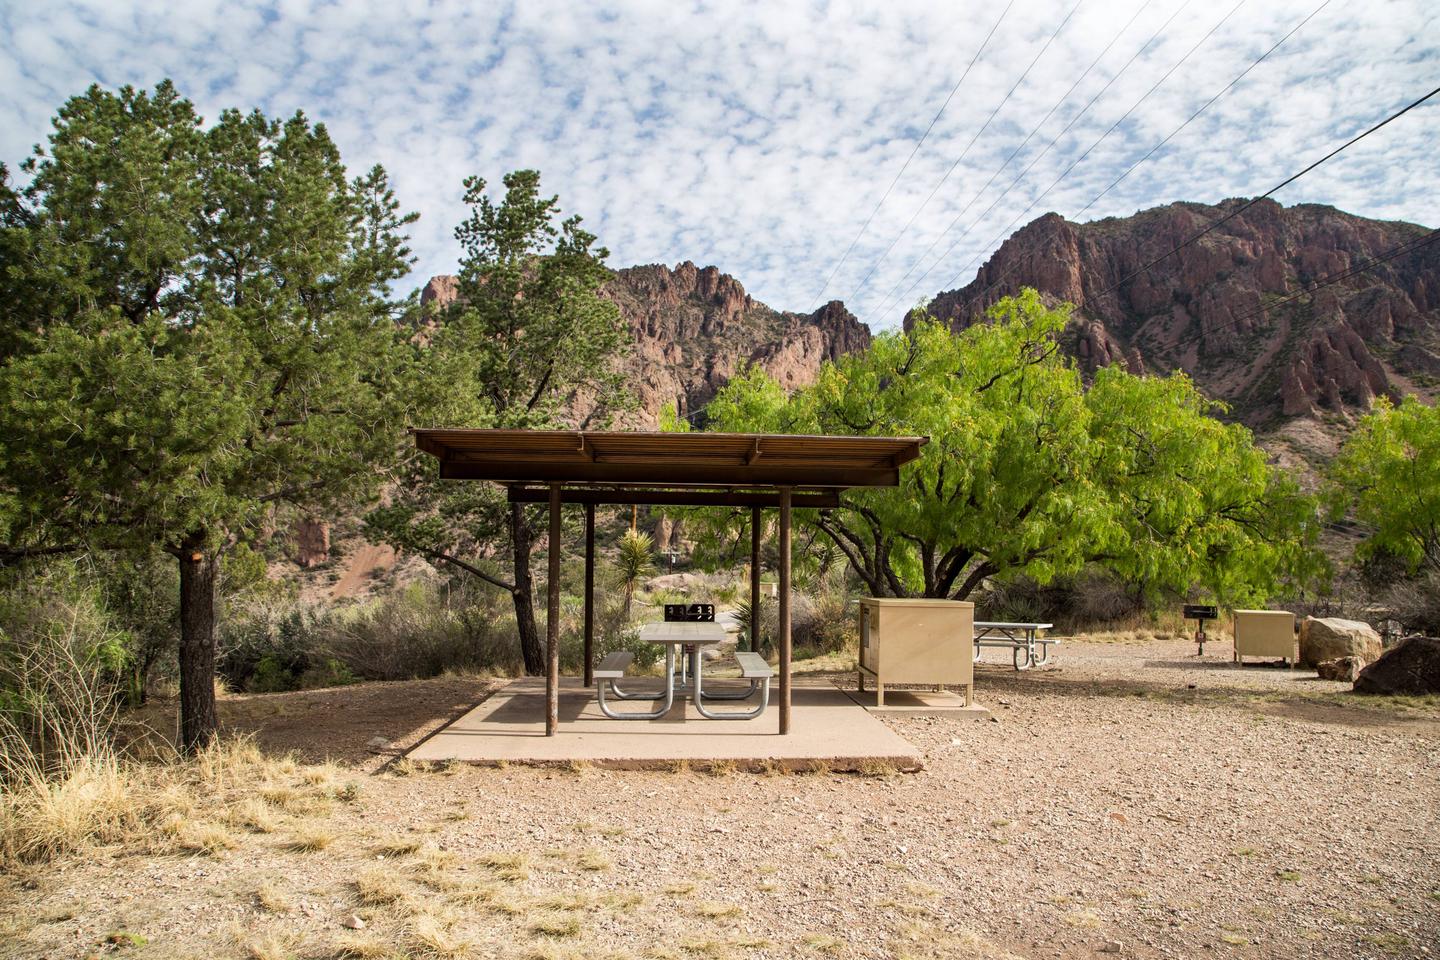 Chisos Basin Campsite #29 full viewView showing shade ramada and all amenities